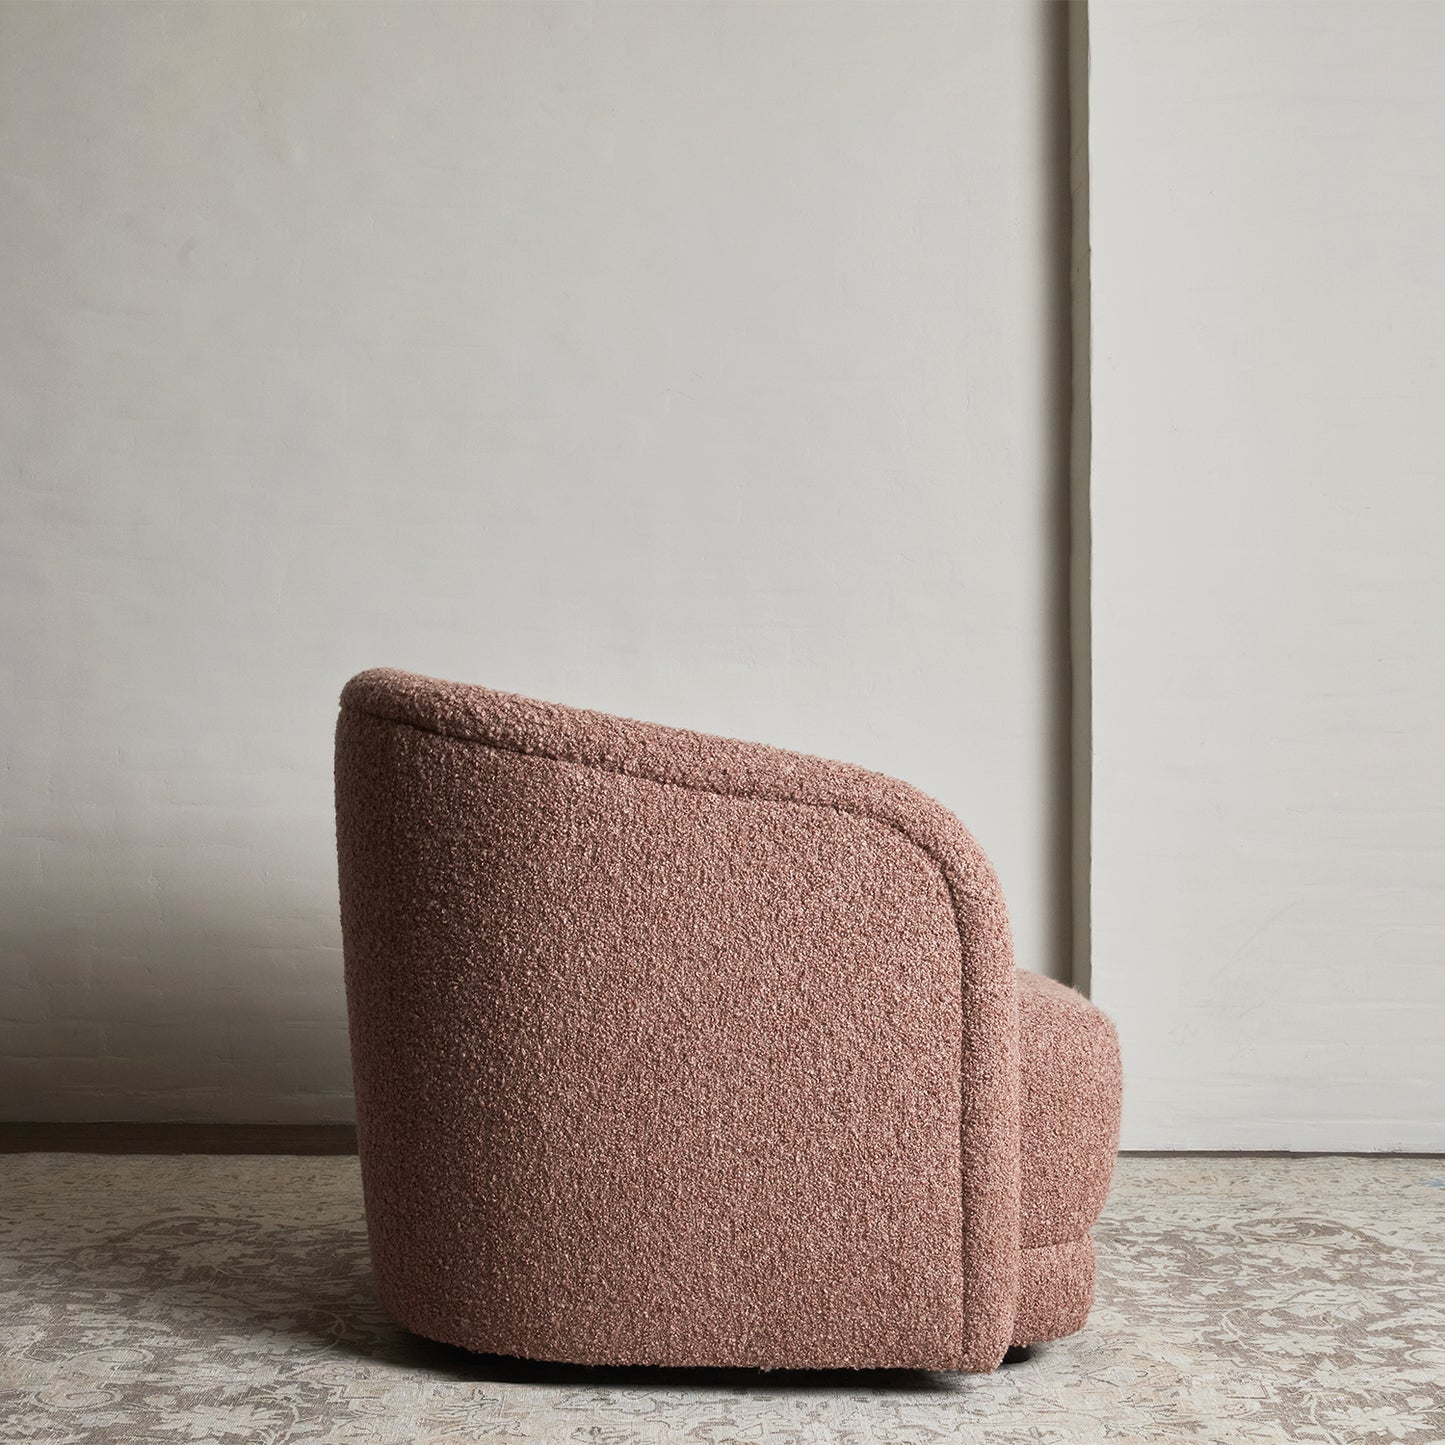 Valence Chair in Burnt Rose Boucle